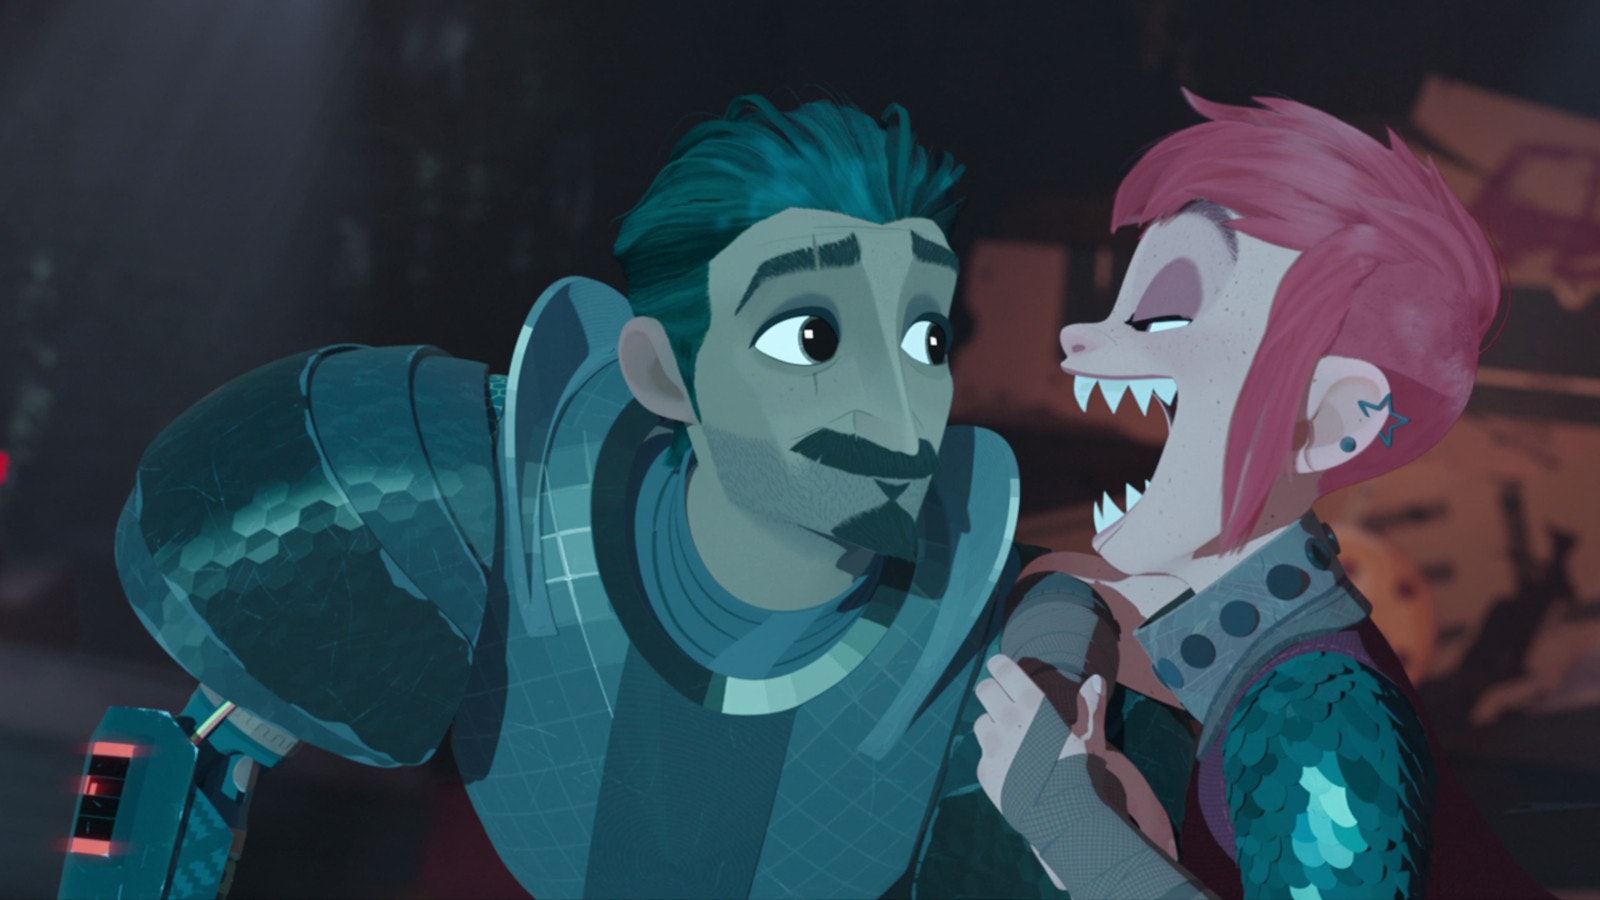 Bubble review: Netflix gives The Little Mermaid an oddball sci-fi